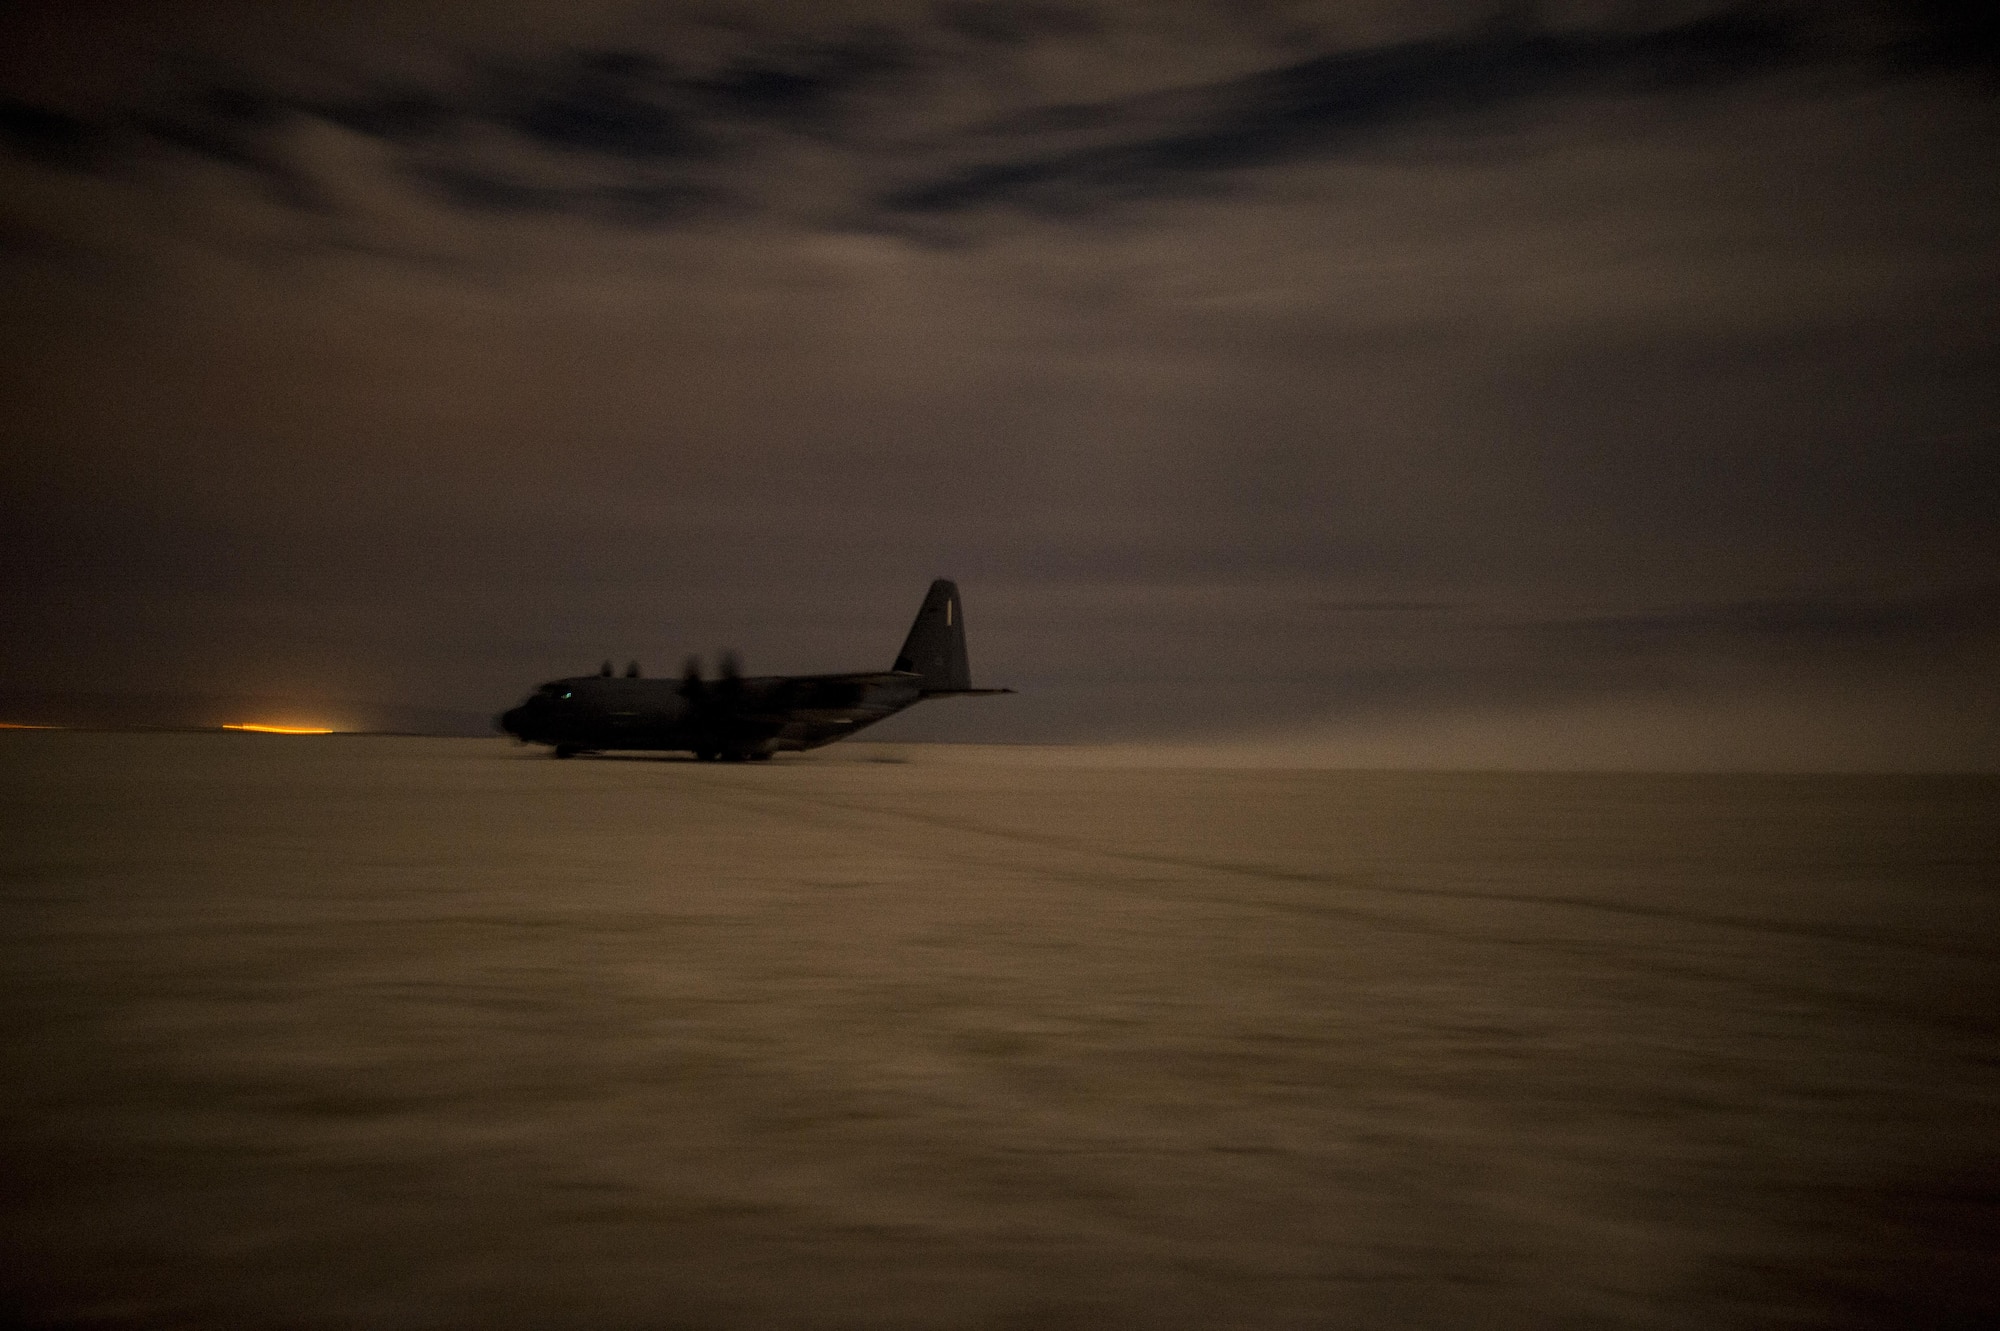 A MC-130J Commando II aircraft takes off after completing a exercise mission during a Full Mission Profile at White Sands Missile Range, N.M., Oct. 12, 2016.  The FMP was utilized to integrate special operations forces and foster tactical maturity through deliberate planning and execution of a force projection package and enable Special Tactics Airmen pre-deployment evaluation. (U.S. Air Force photo by Tech. Sgt. Manuel J. Martinez)